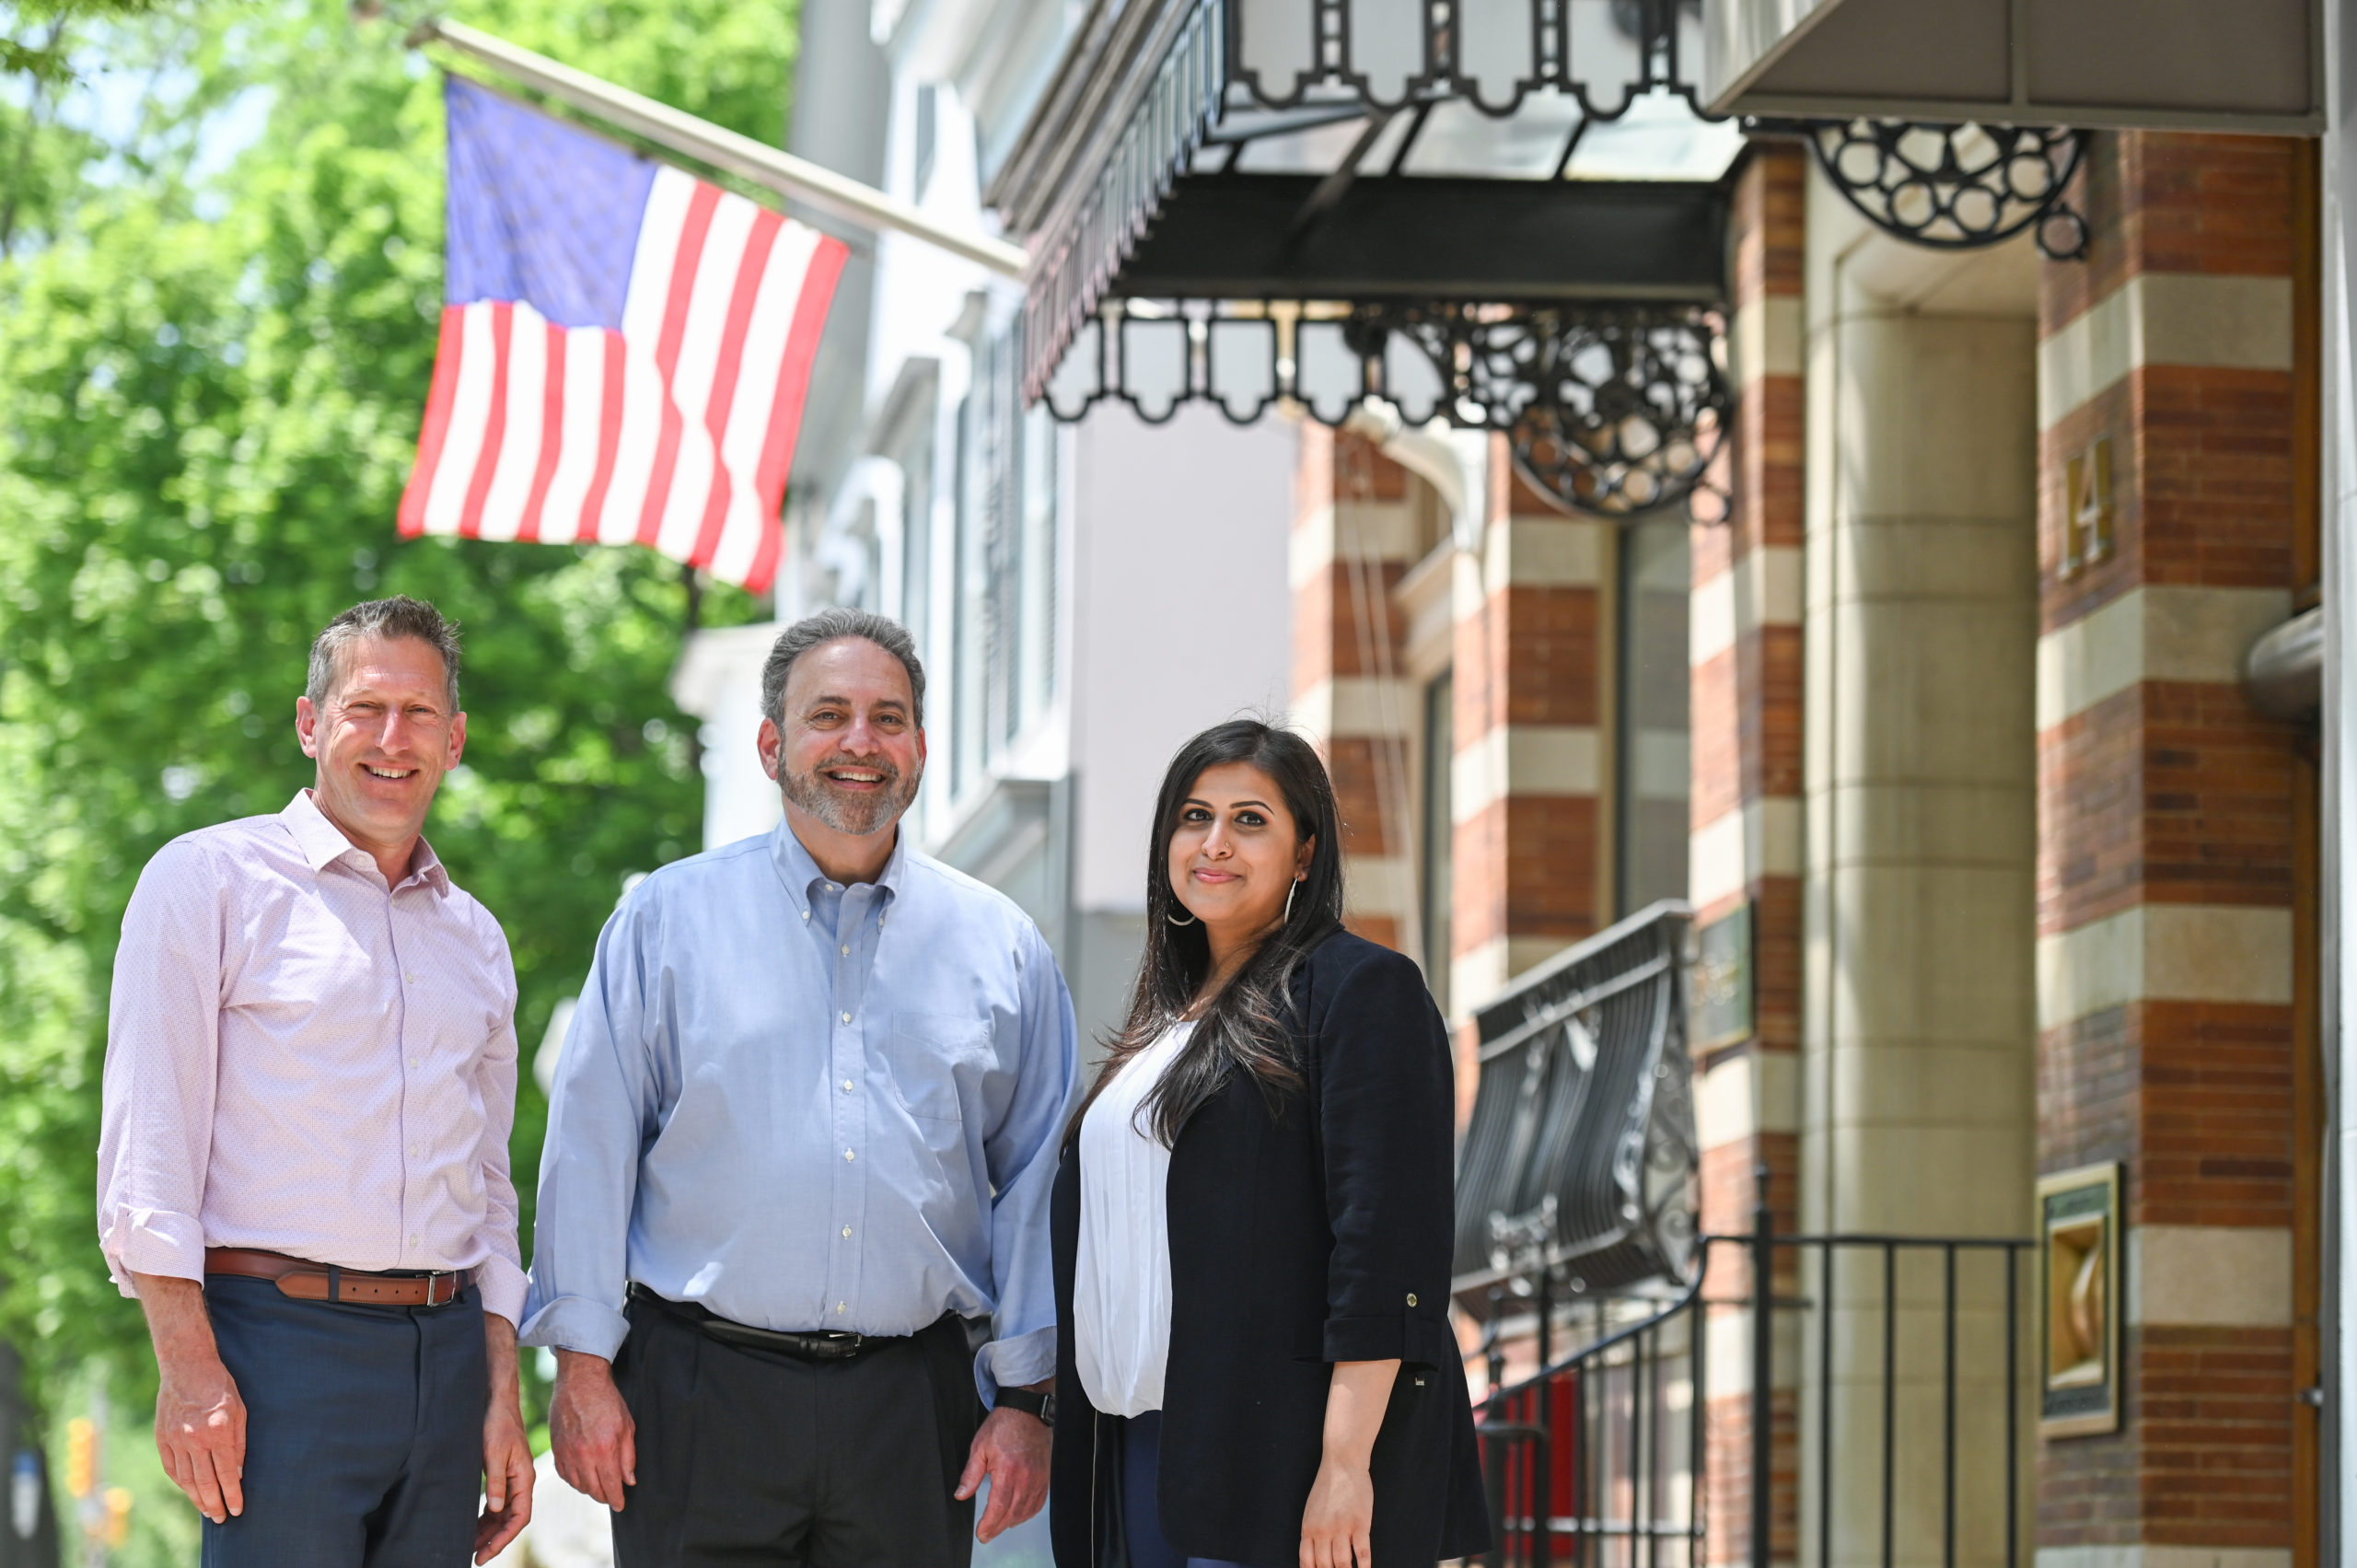 Andrew Zwicker, Roy Freiman, and Sadaf Jaffer pose for a team photo under and American flag.